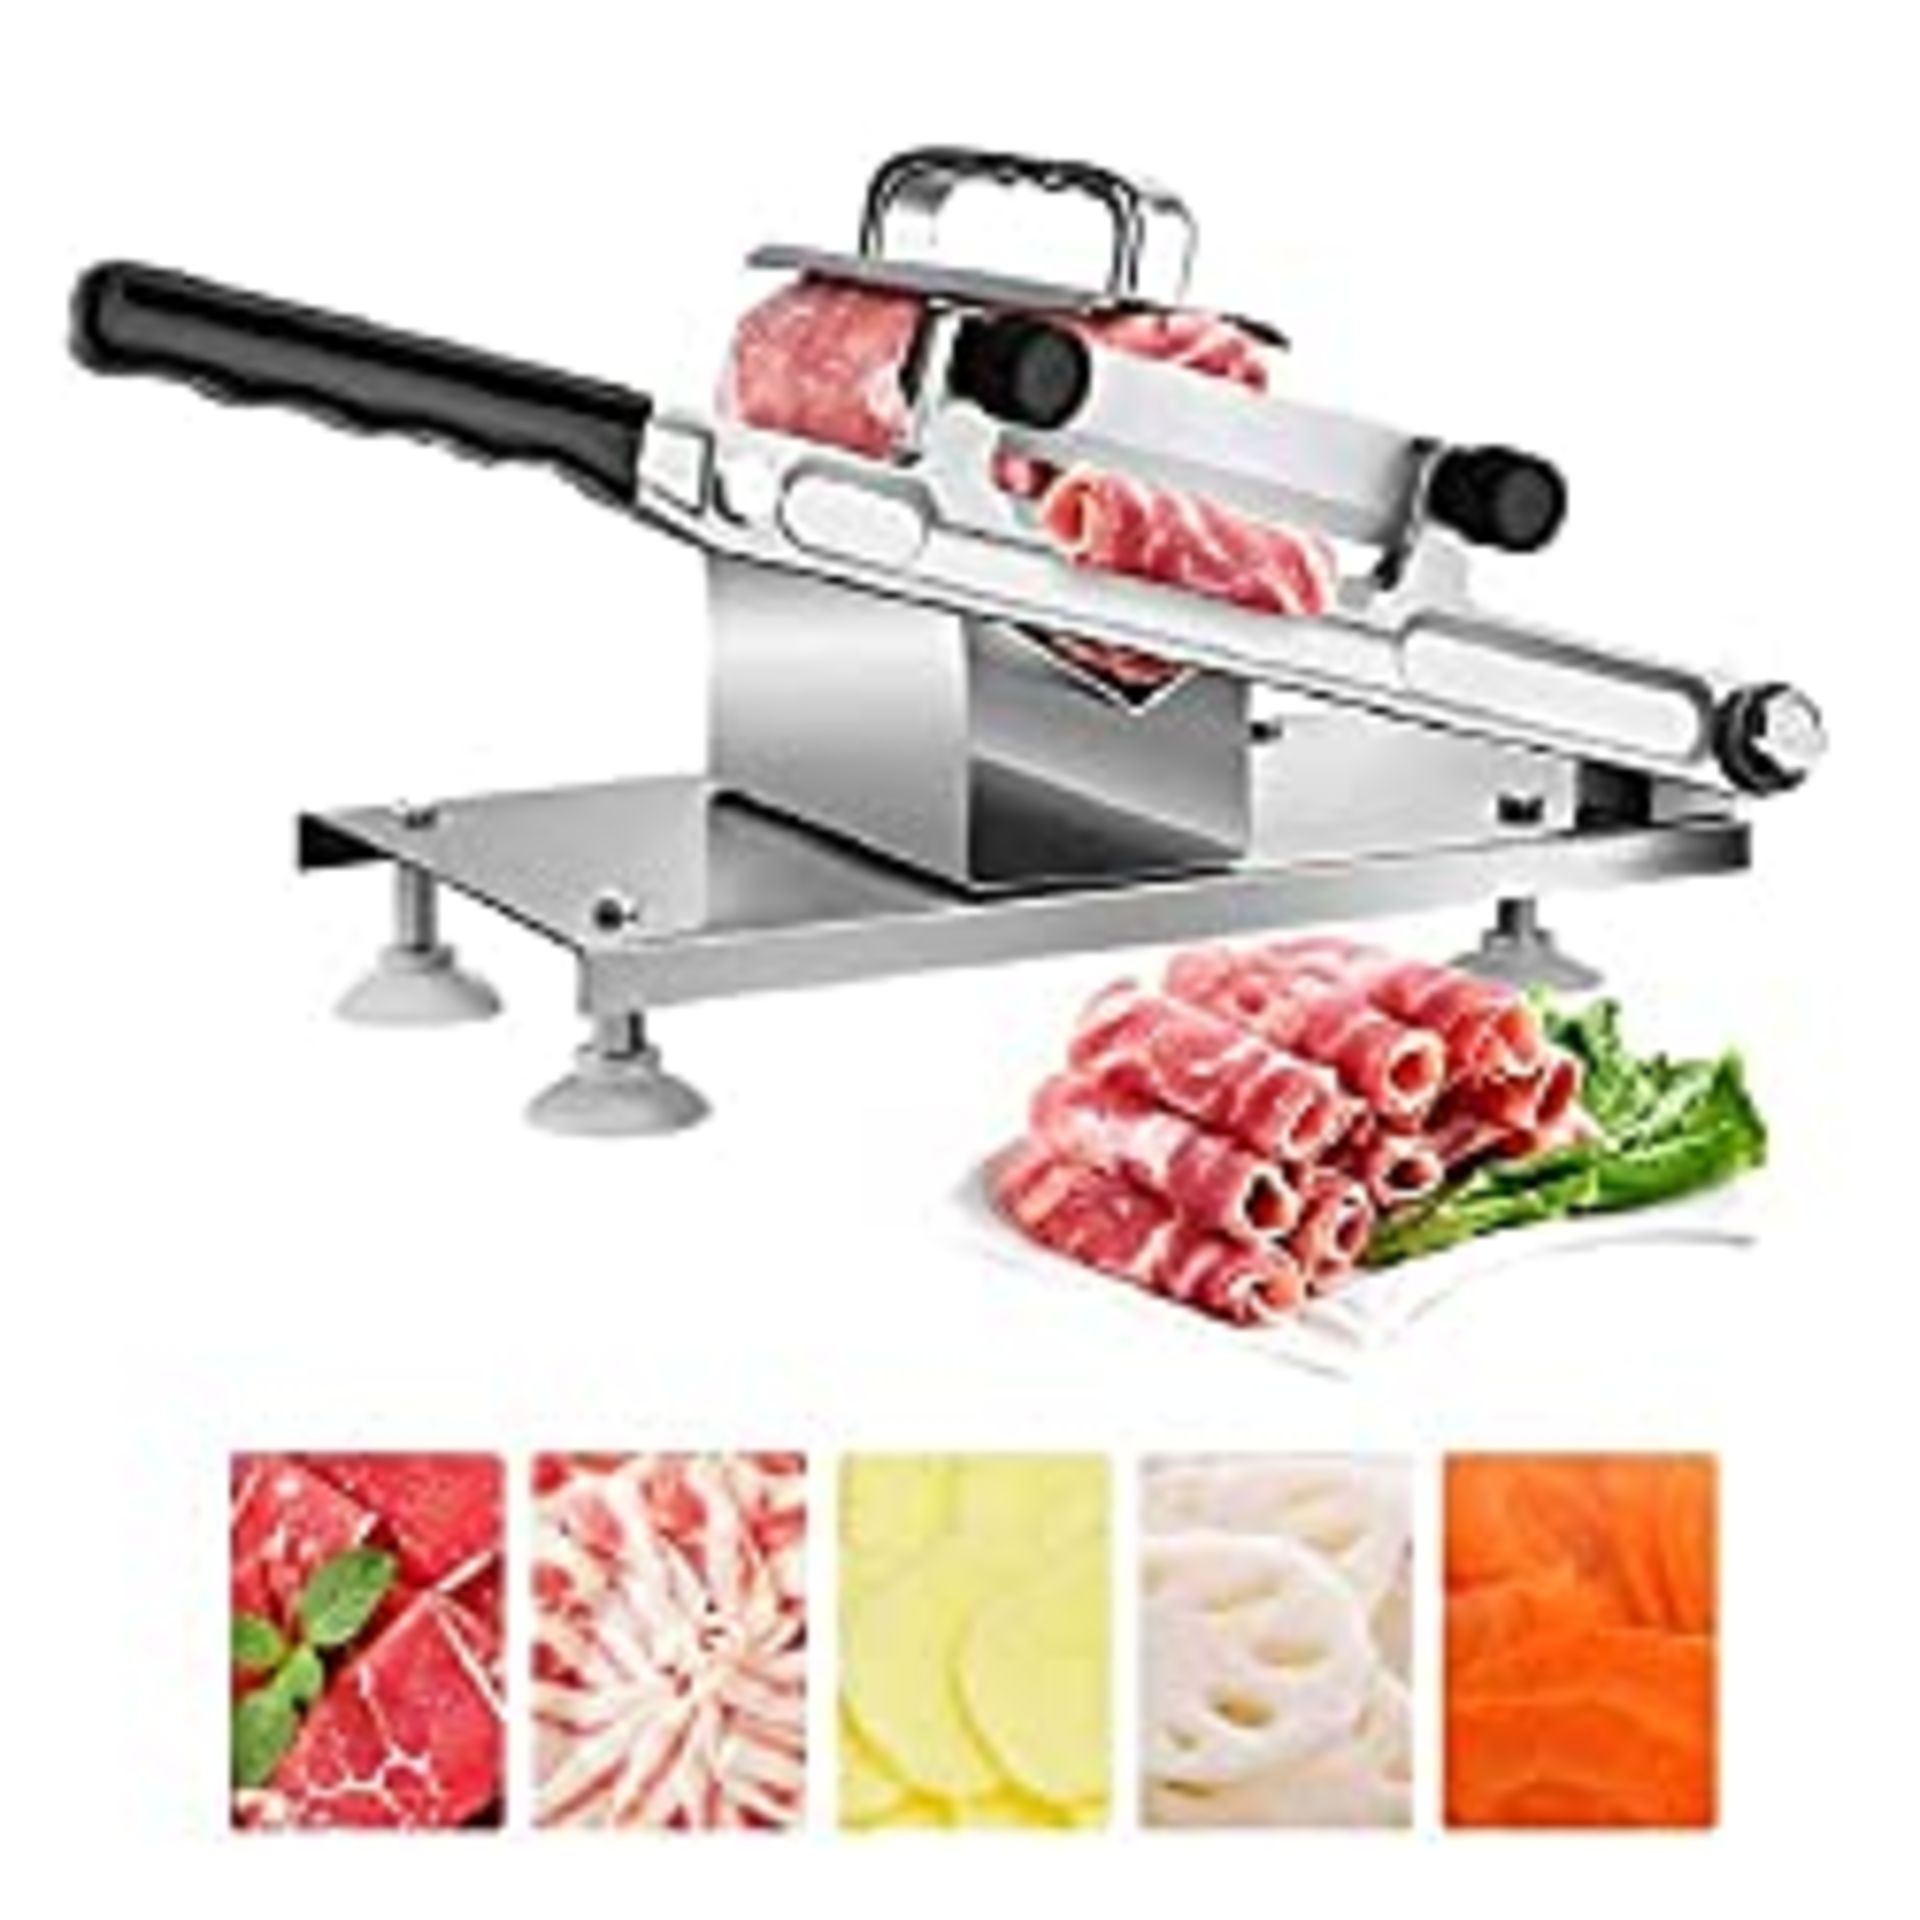 RRP £39.98 uyoyous Frozen Meat Slicer Manual Meat Slicers Stainless